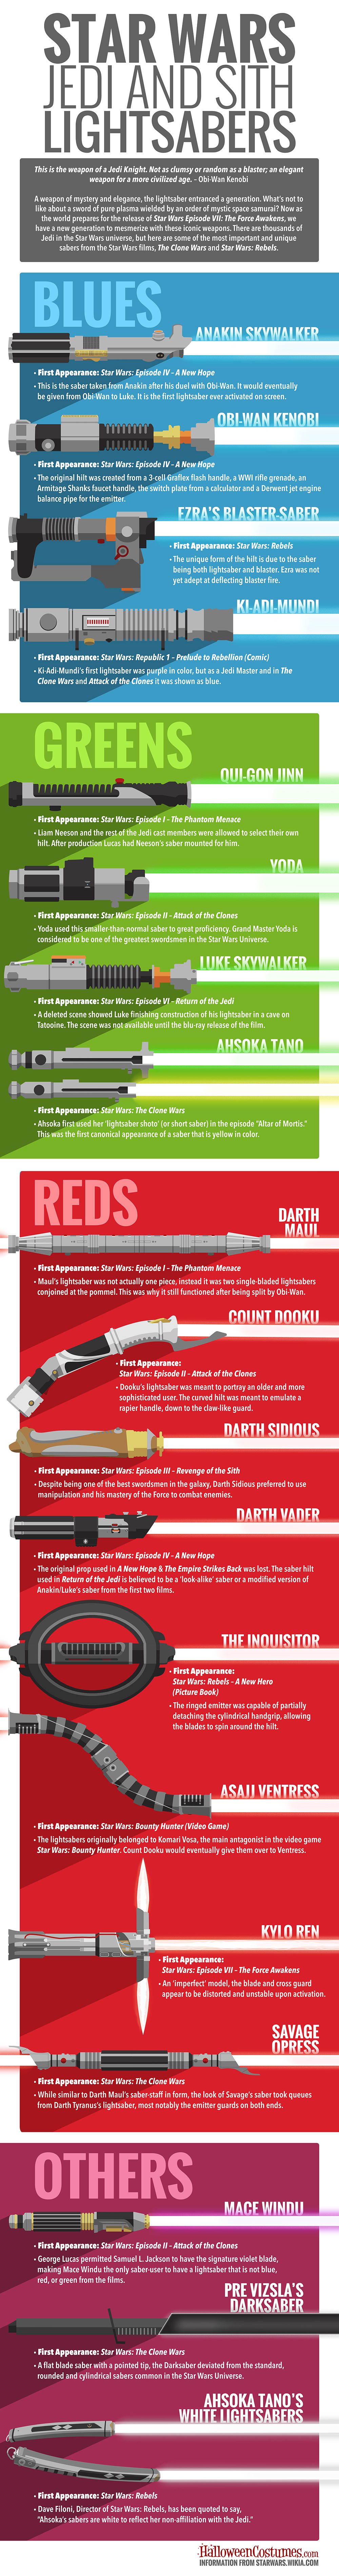 Star-Wars-Lightsabers-Infographic